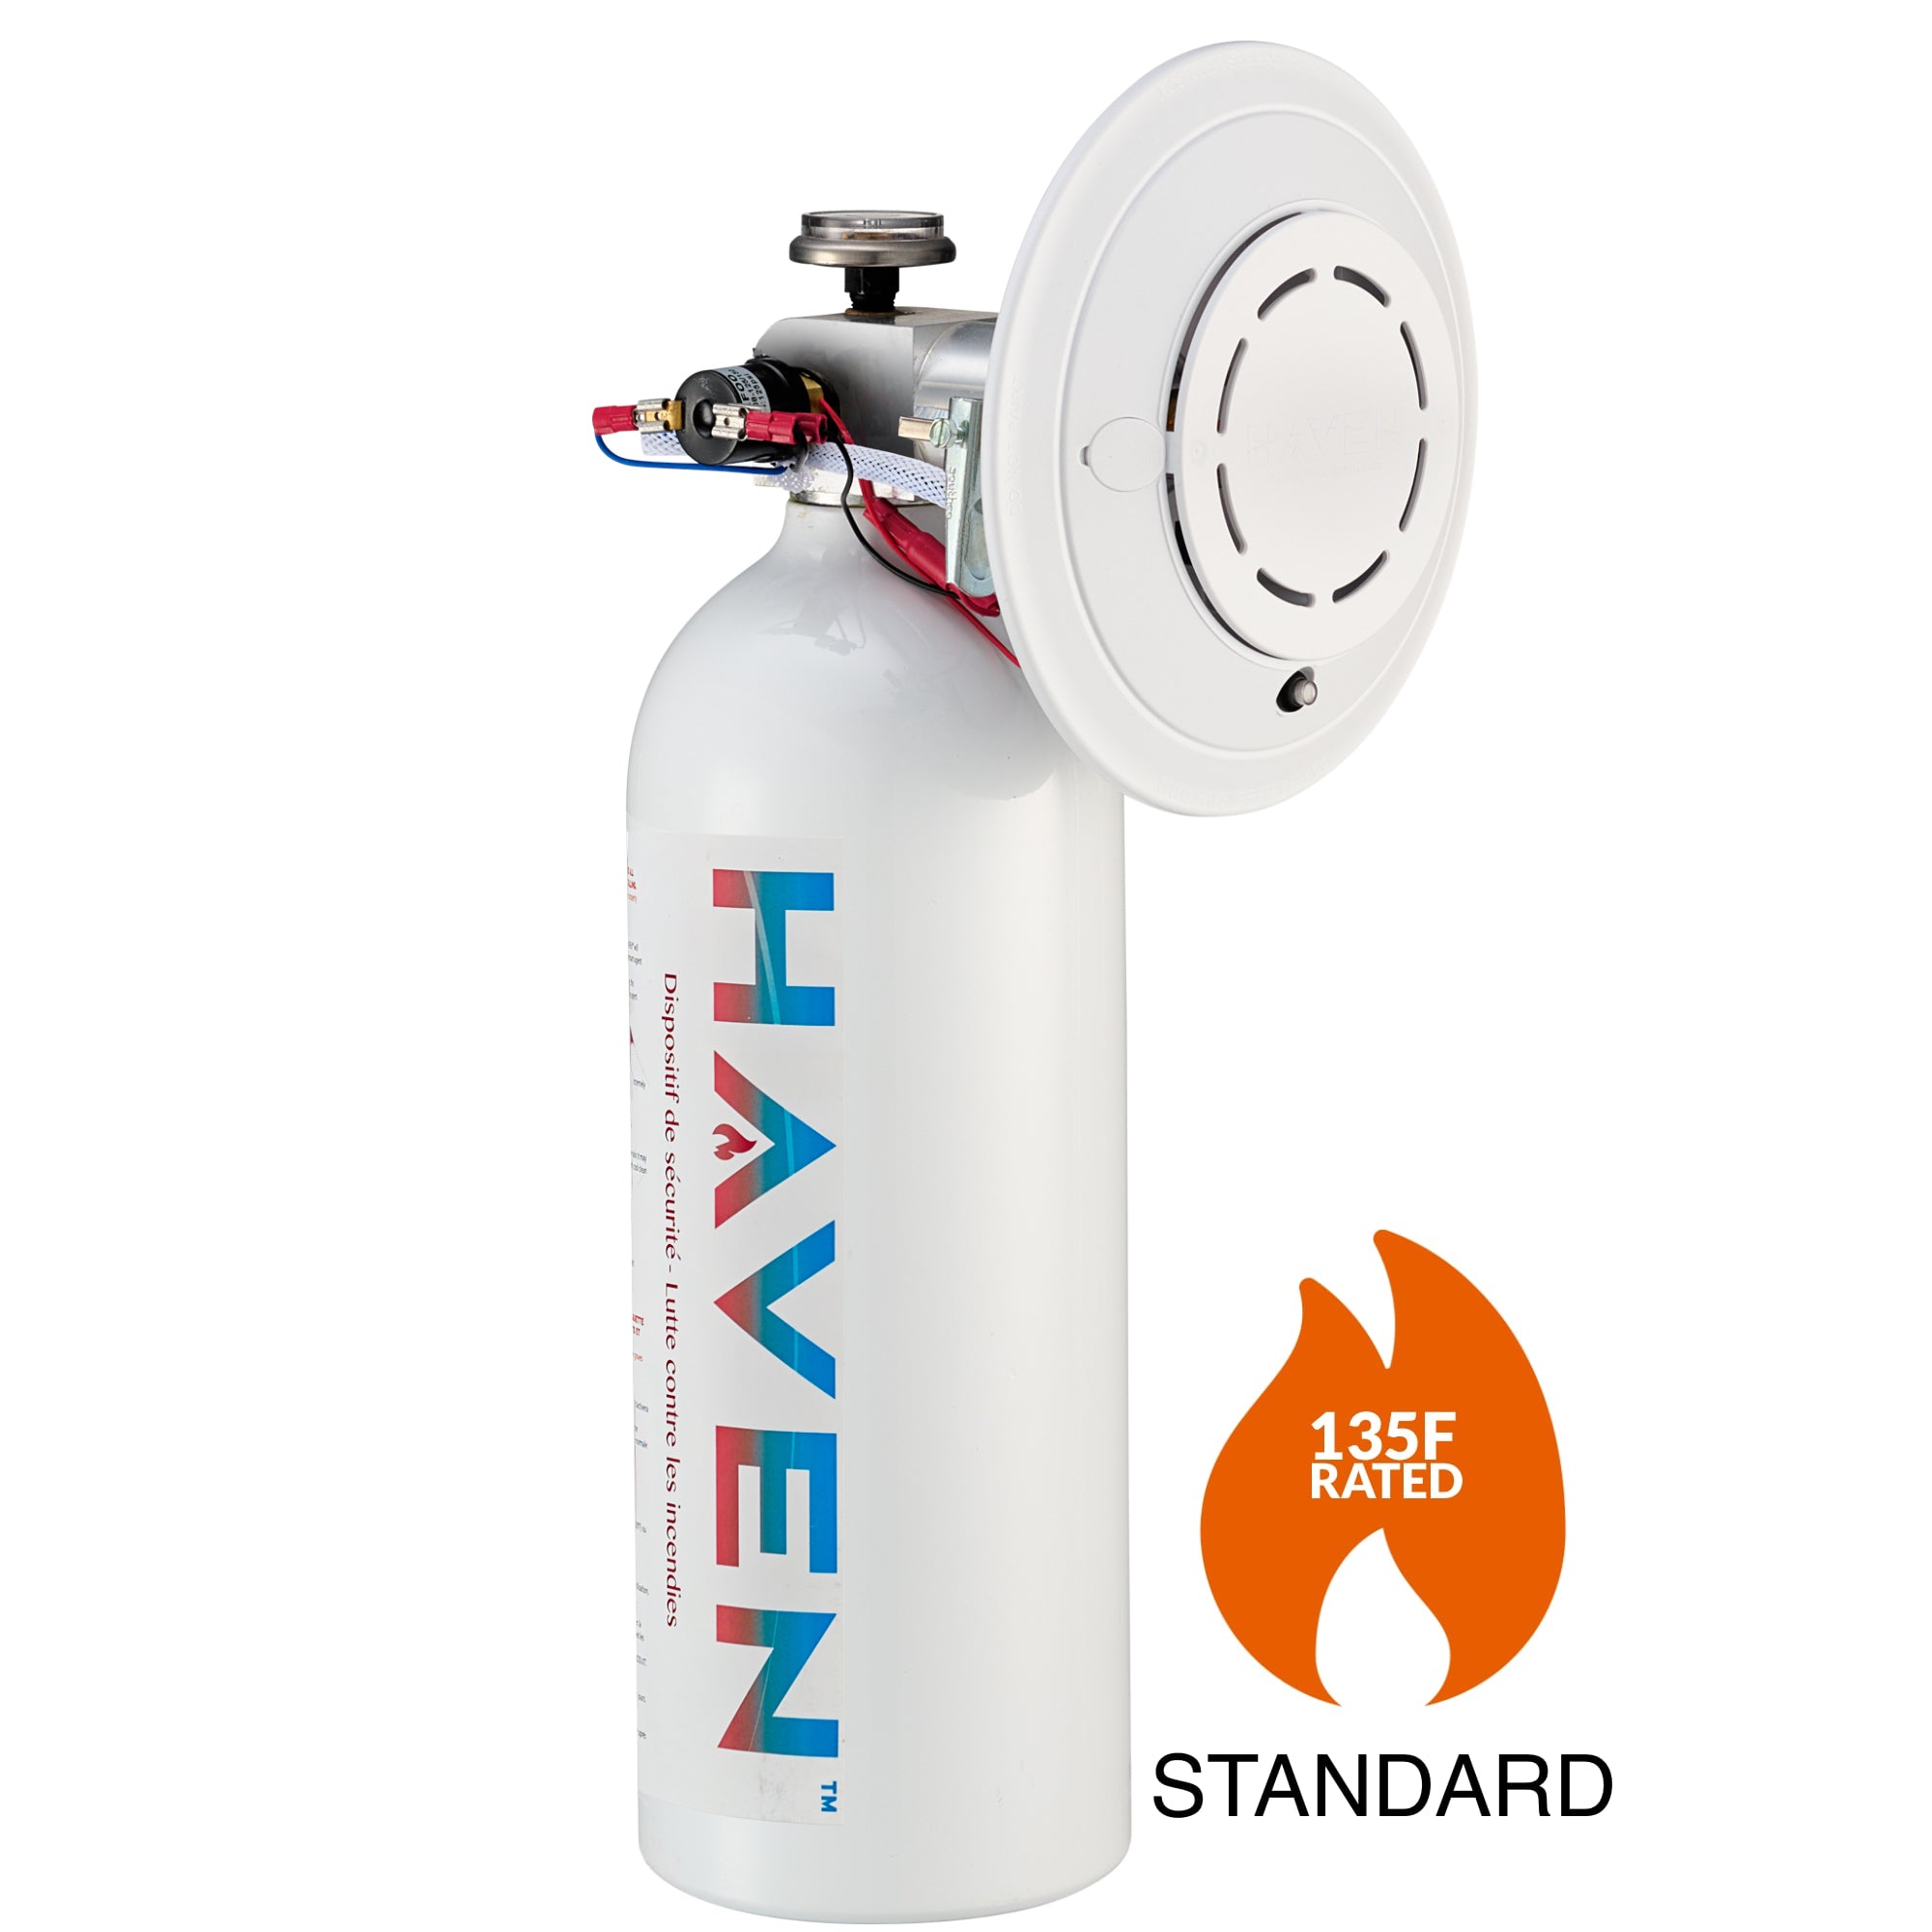 HAVEN Fire Suppression Safety Device 135F - 57C Rated (Preorder)